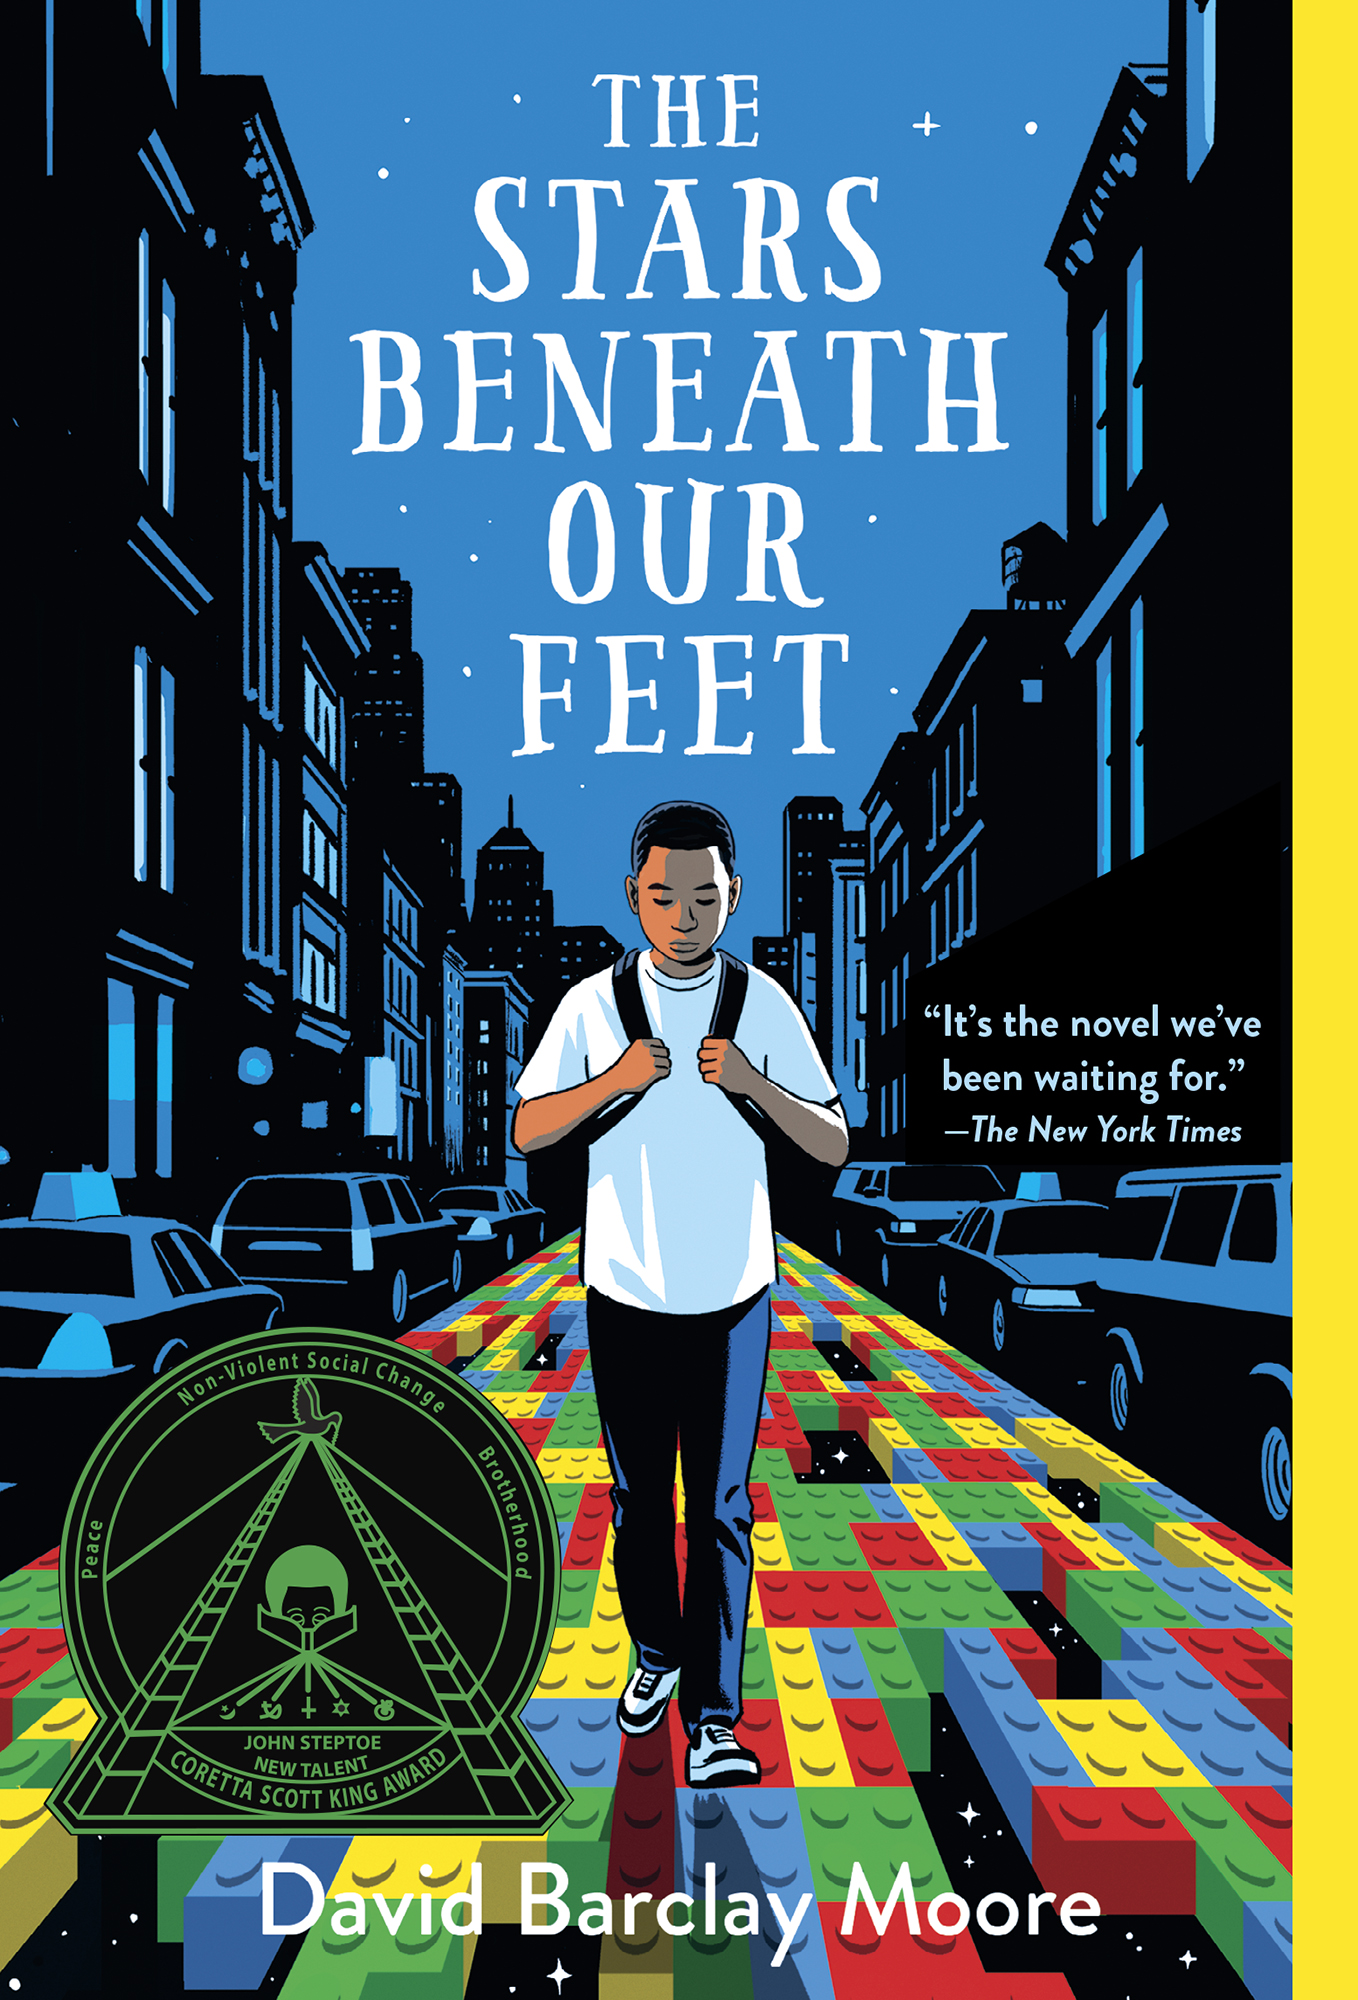 The Stars Beneath Our Feet (David Barclay Moore; Knopf Books for Young Readers)